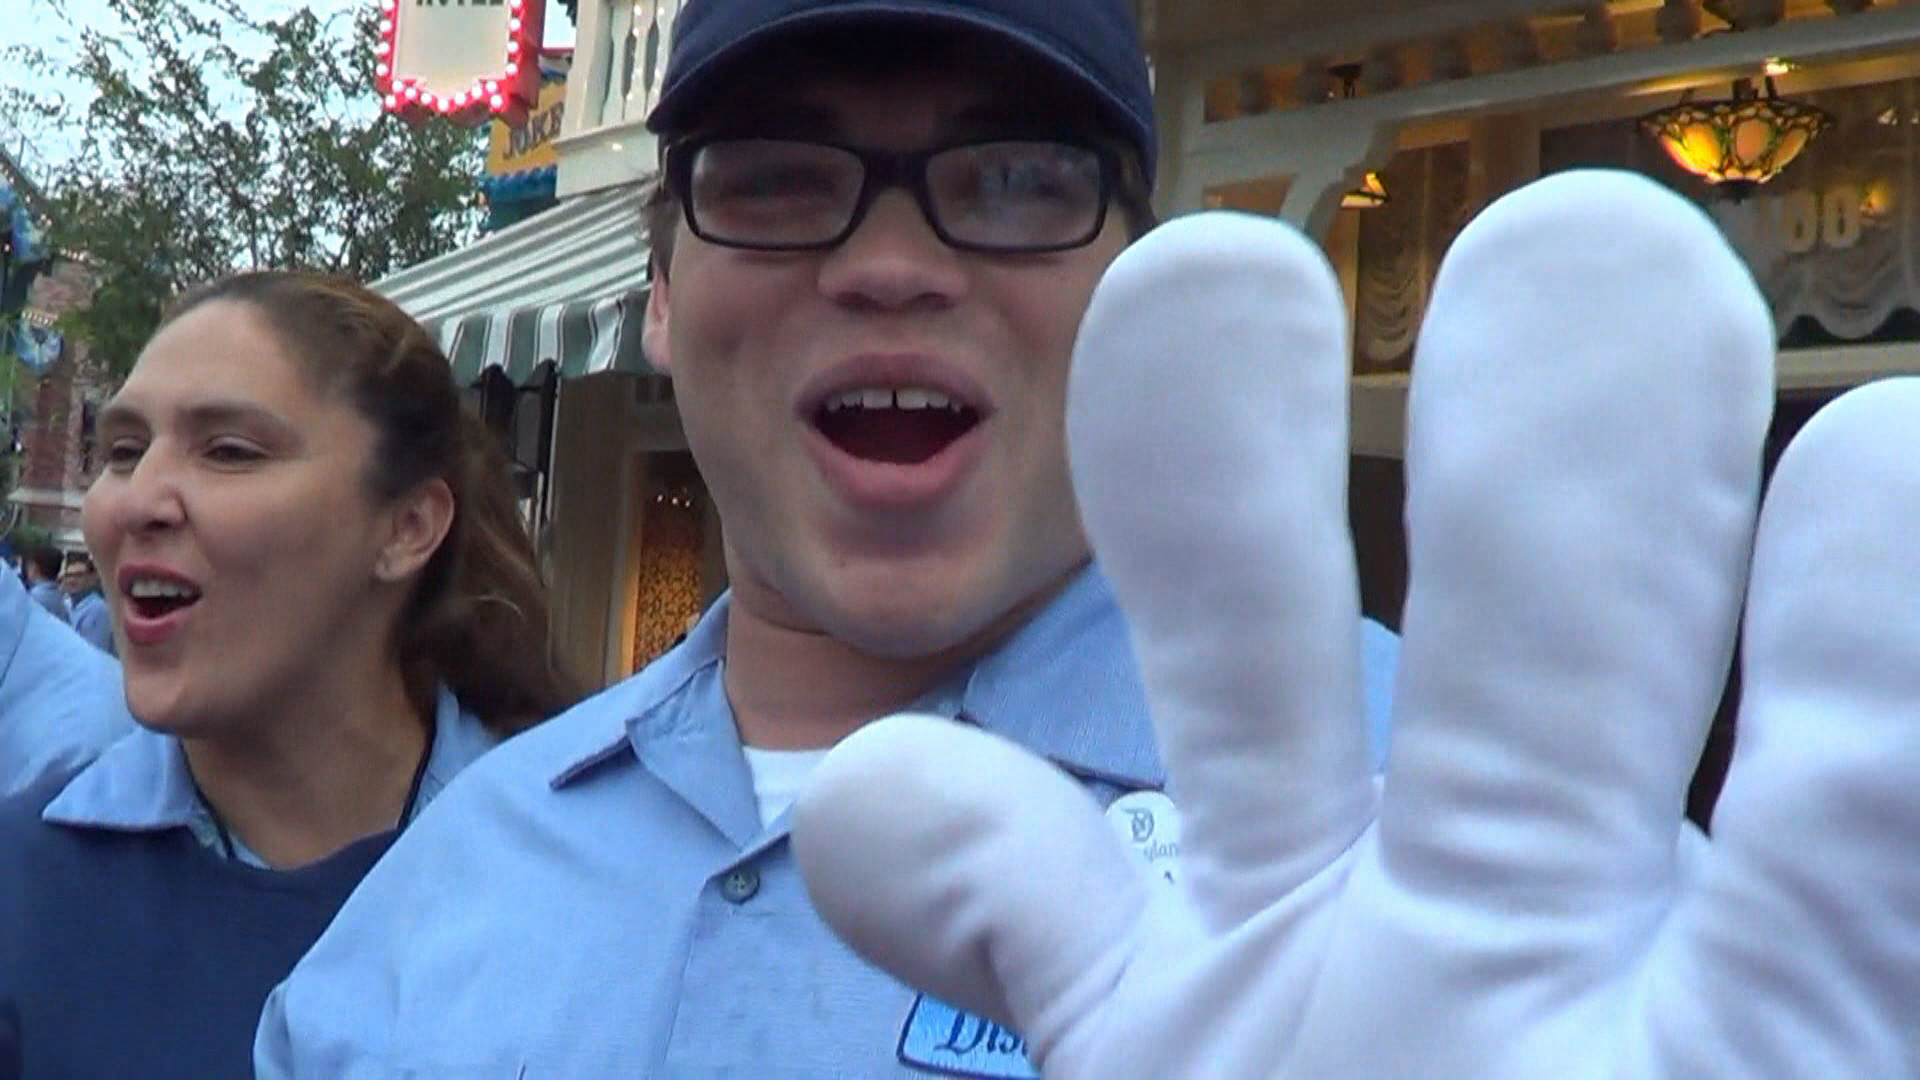 04 Disneyland - High 5s from Cast Members